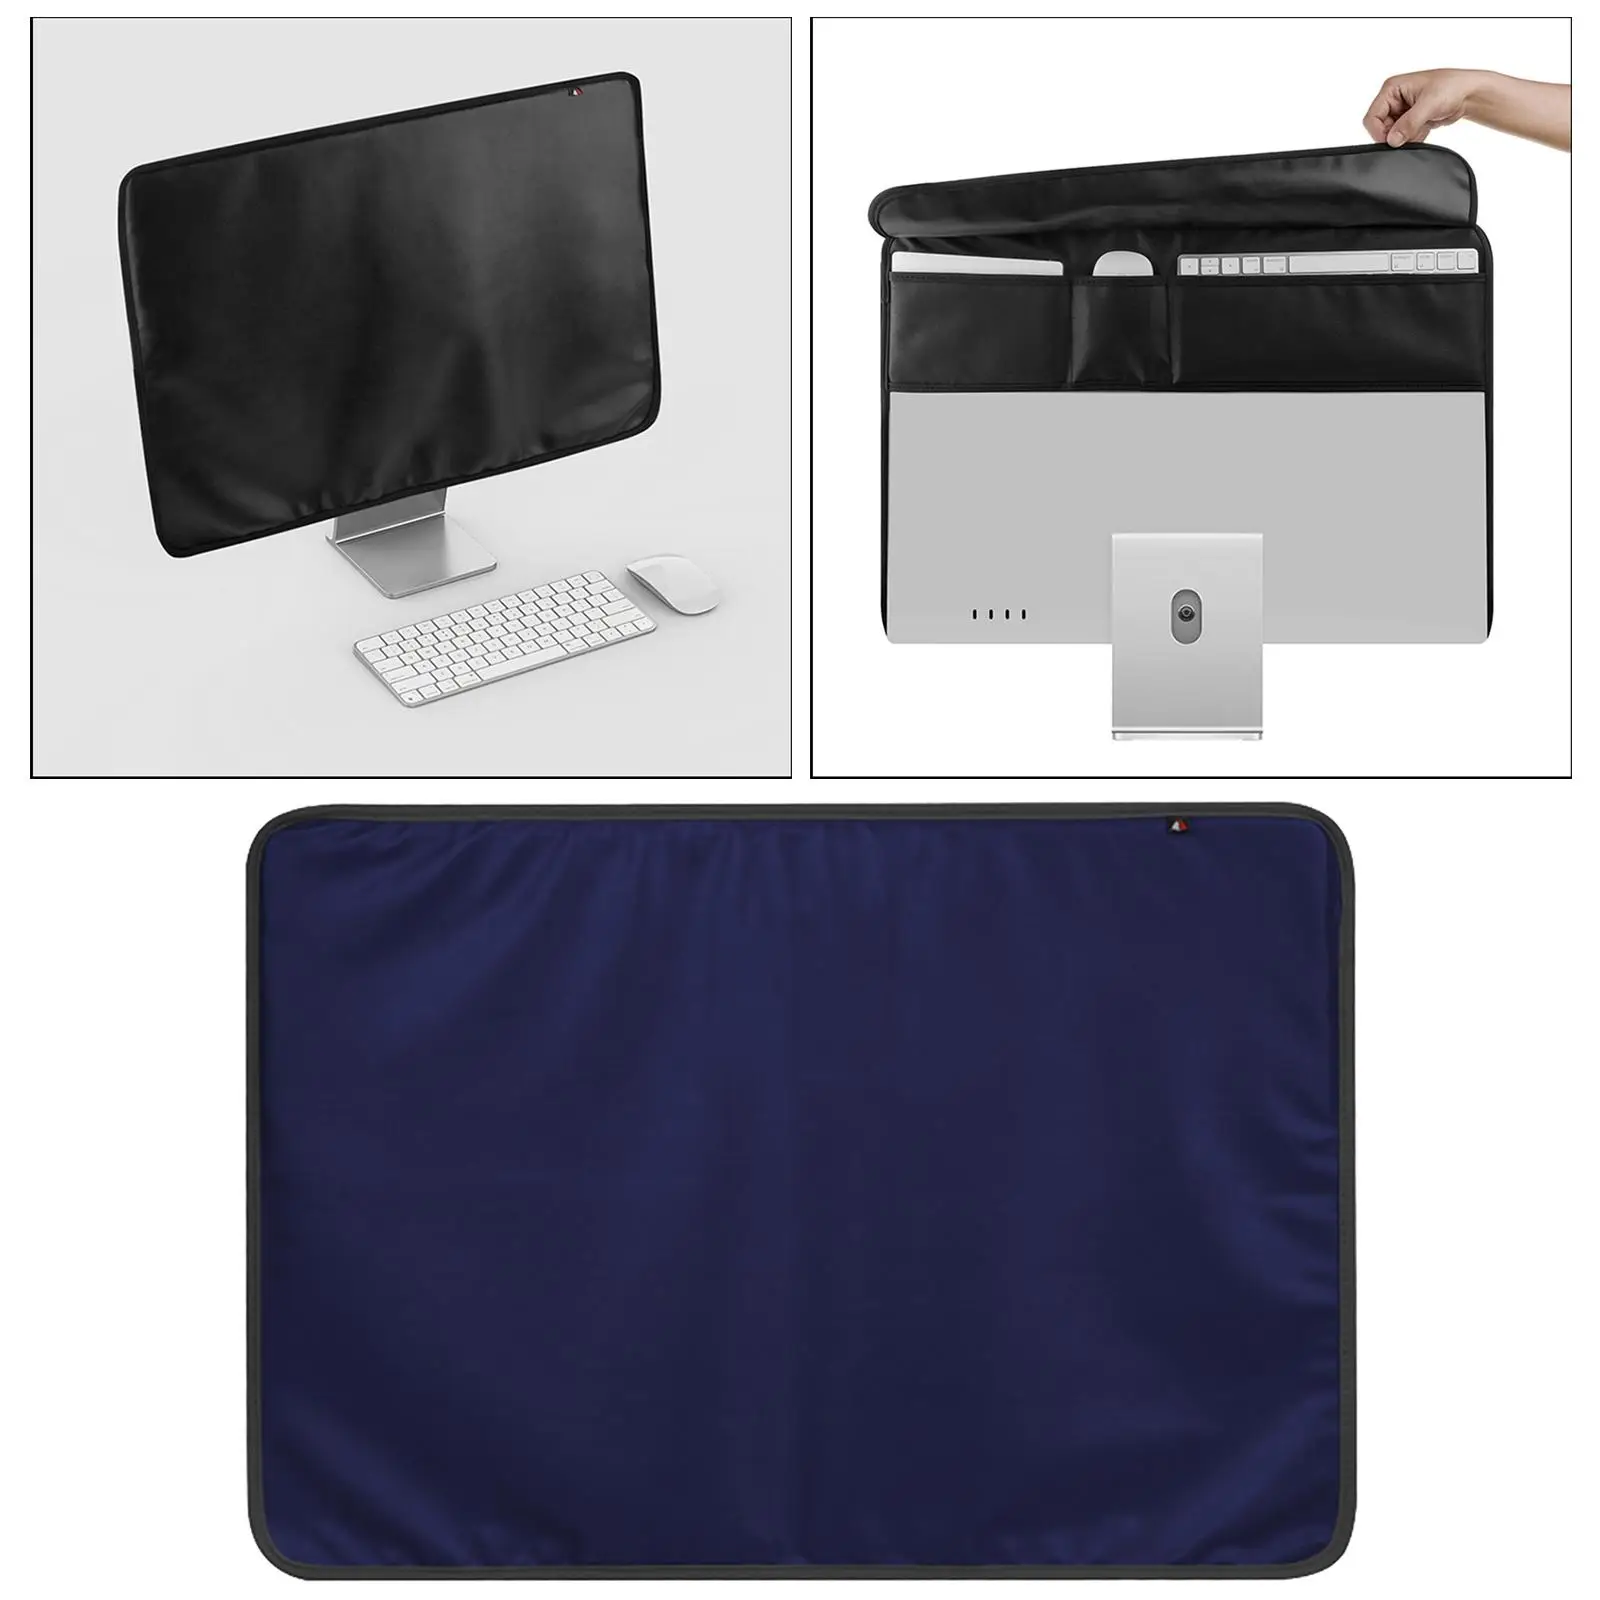 Monitor Dust Cover PU Leather Antistatic Screen Display LED LCD HD Panel Sleeve Case with for 24`` TV Computer